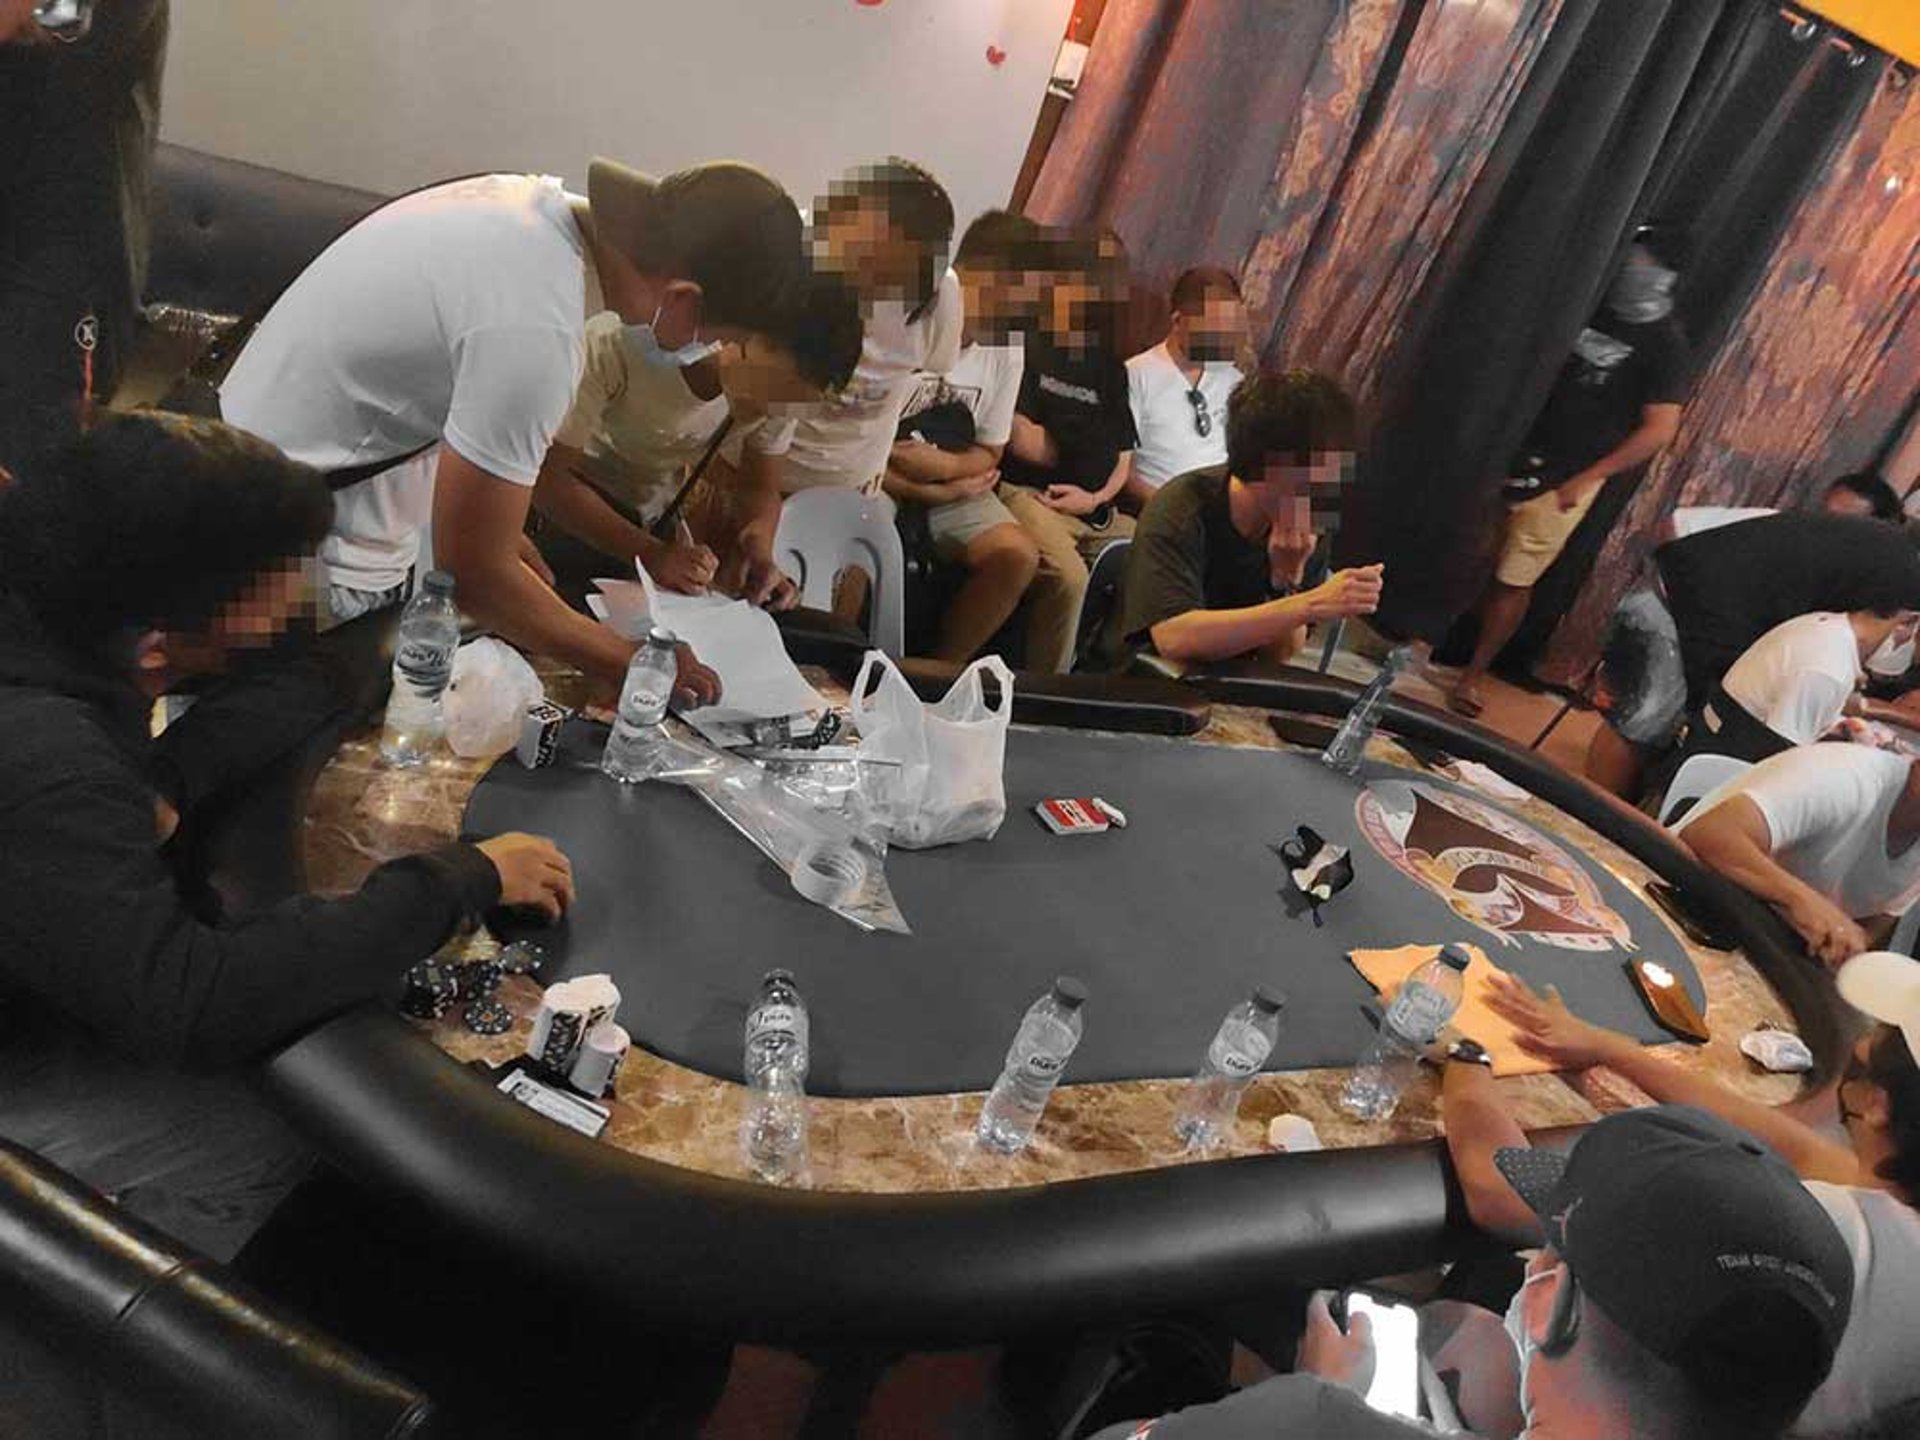 Cop, fire officer among 28 arrested in illegal gambling raid